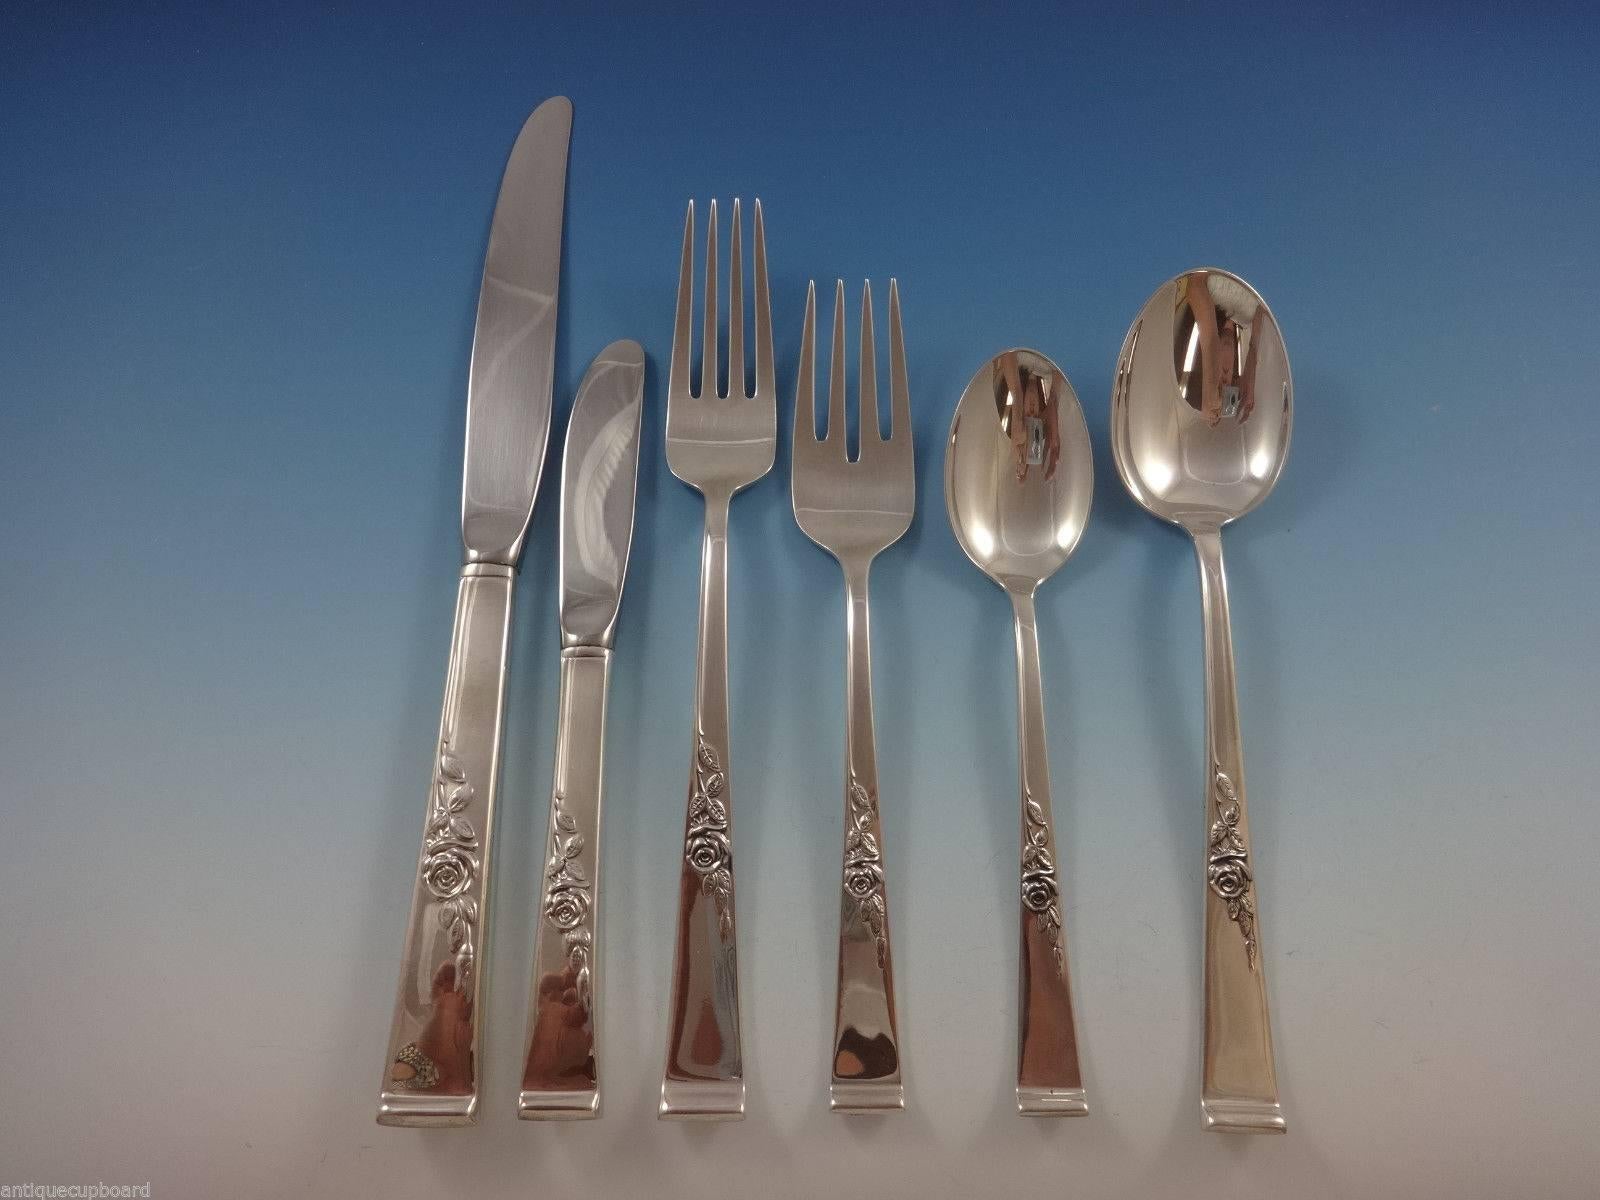 Beautiful Classic Rose by Reed & Barton sterling silver flatware set - 77 pieces. This set includes:

12 knives, 9 1/8